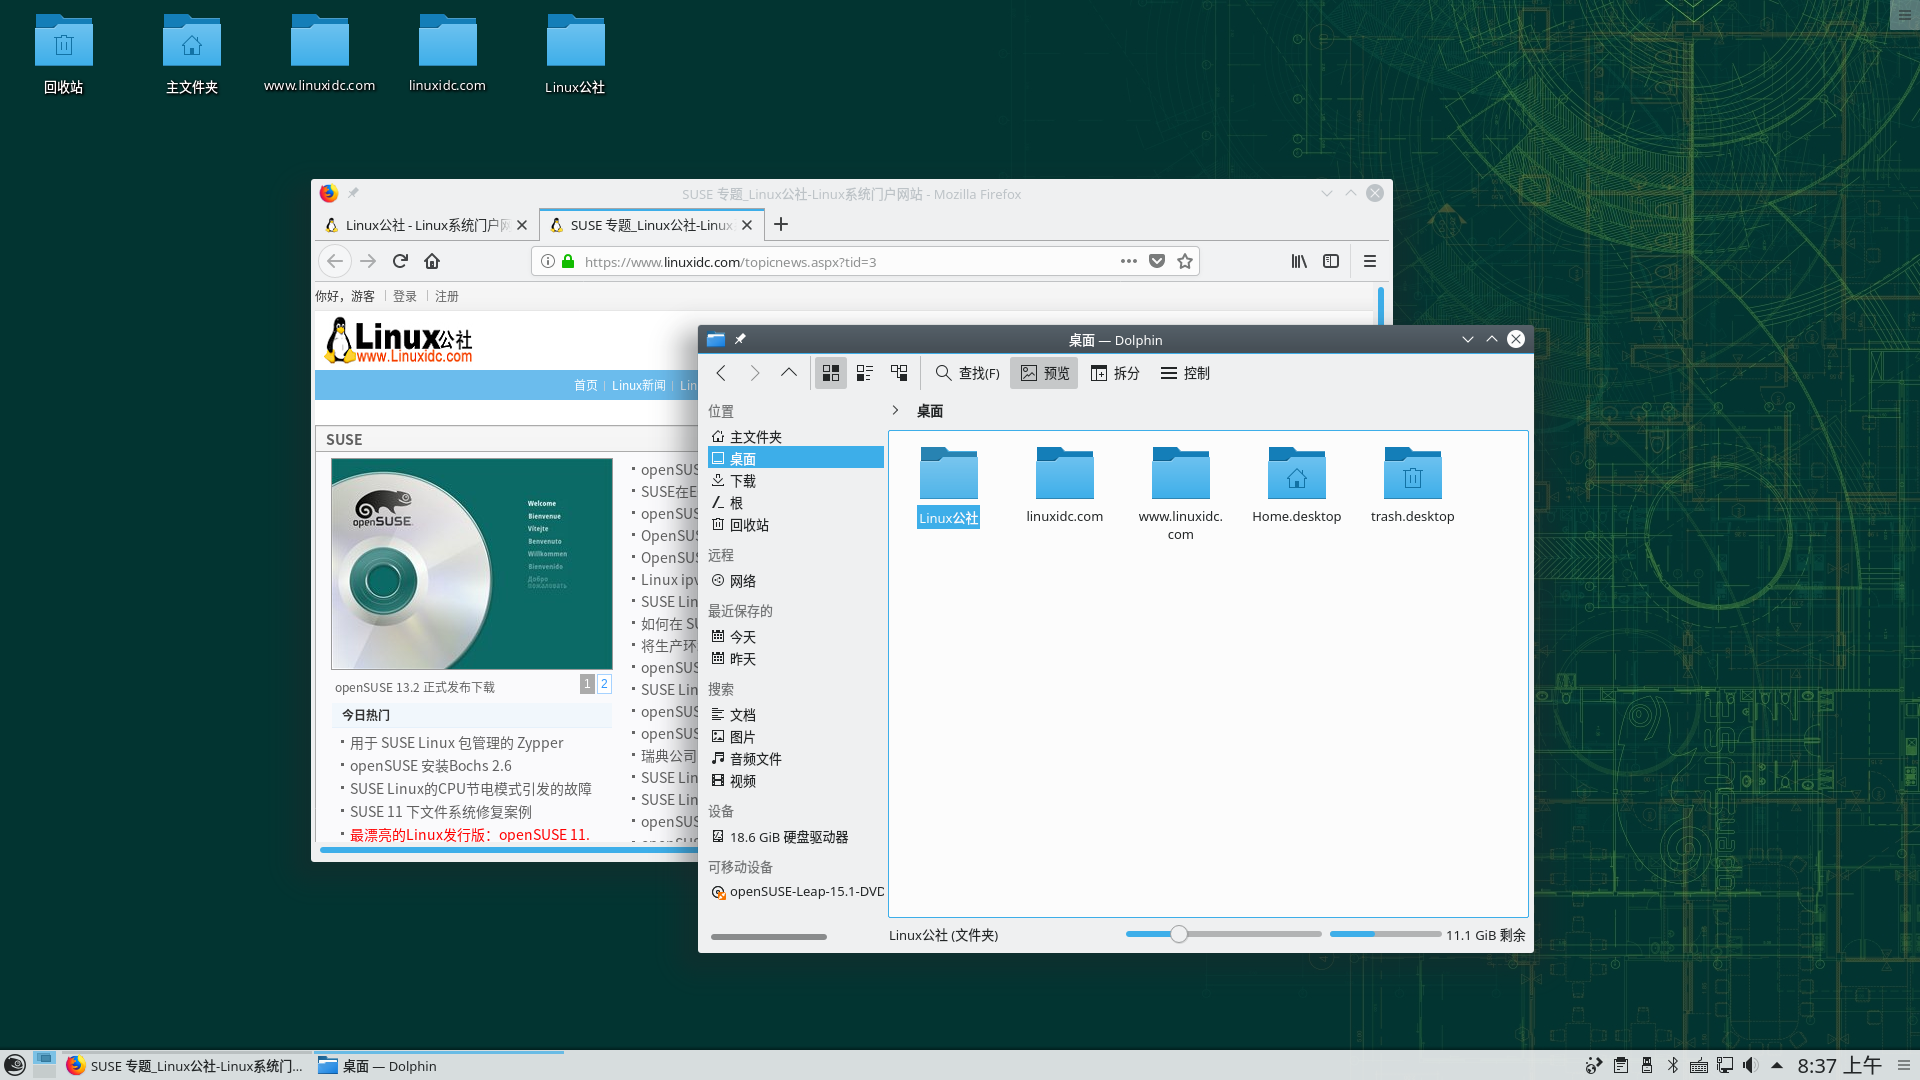 Linux odbc. Linux OPENSUSE Leap. Leap дистрибутив. OPENSUSE Leap 15.3 XFCE. OPENSUSE Leap 15.5.